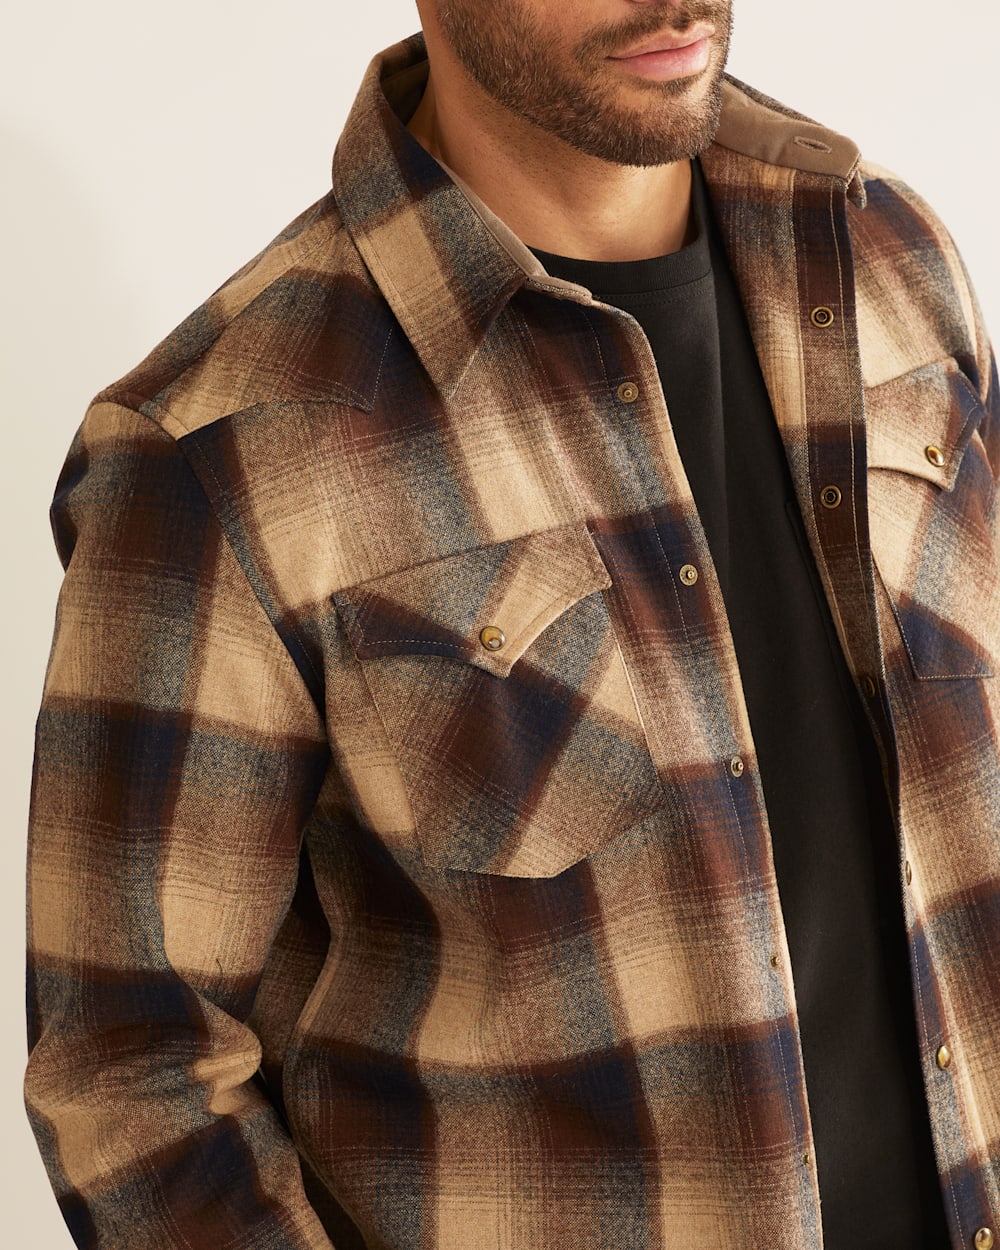 ALTERNATE VIEW OF MEN'S PLAID SNAP-FRONT WESTERN CANYON SHIRT IN BROWN/NAVY OMBRE image number 4